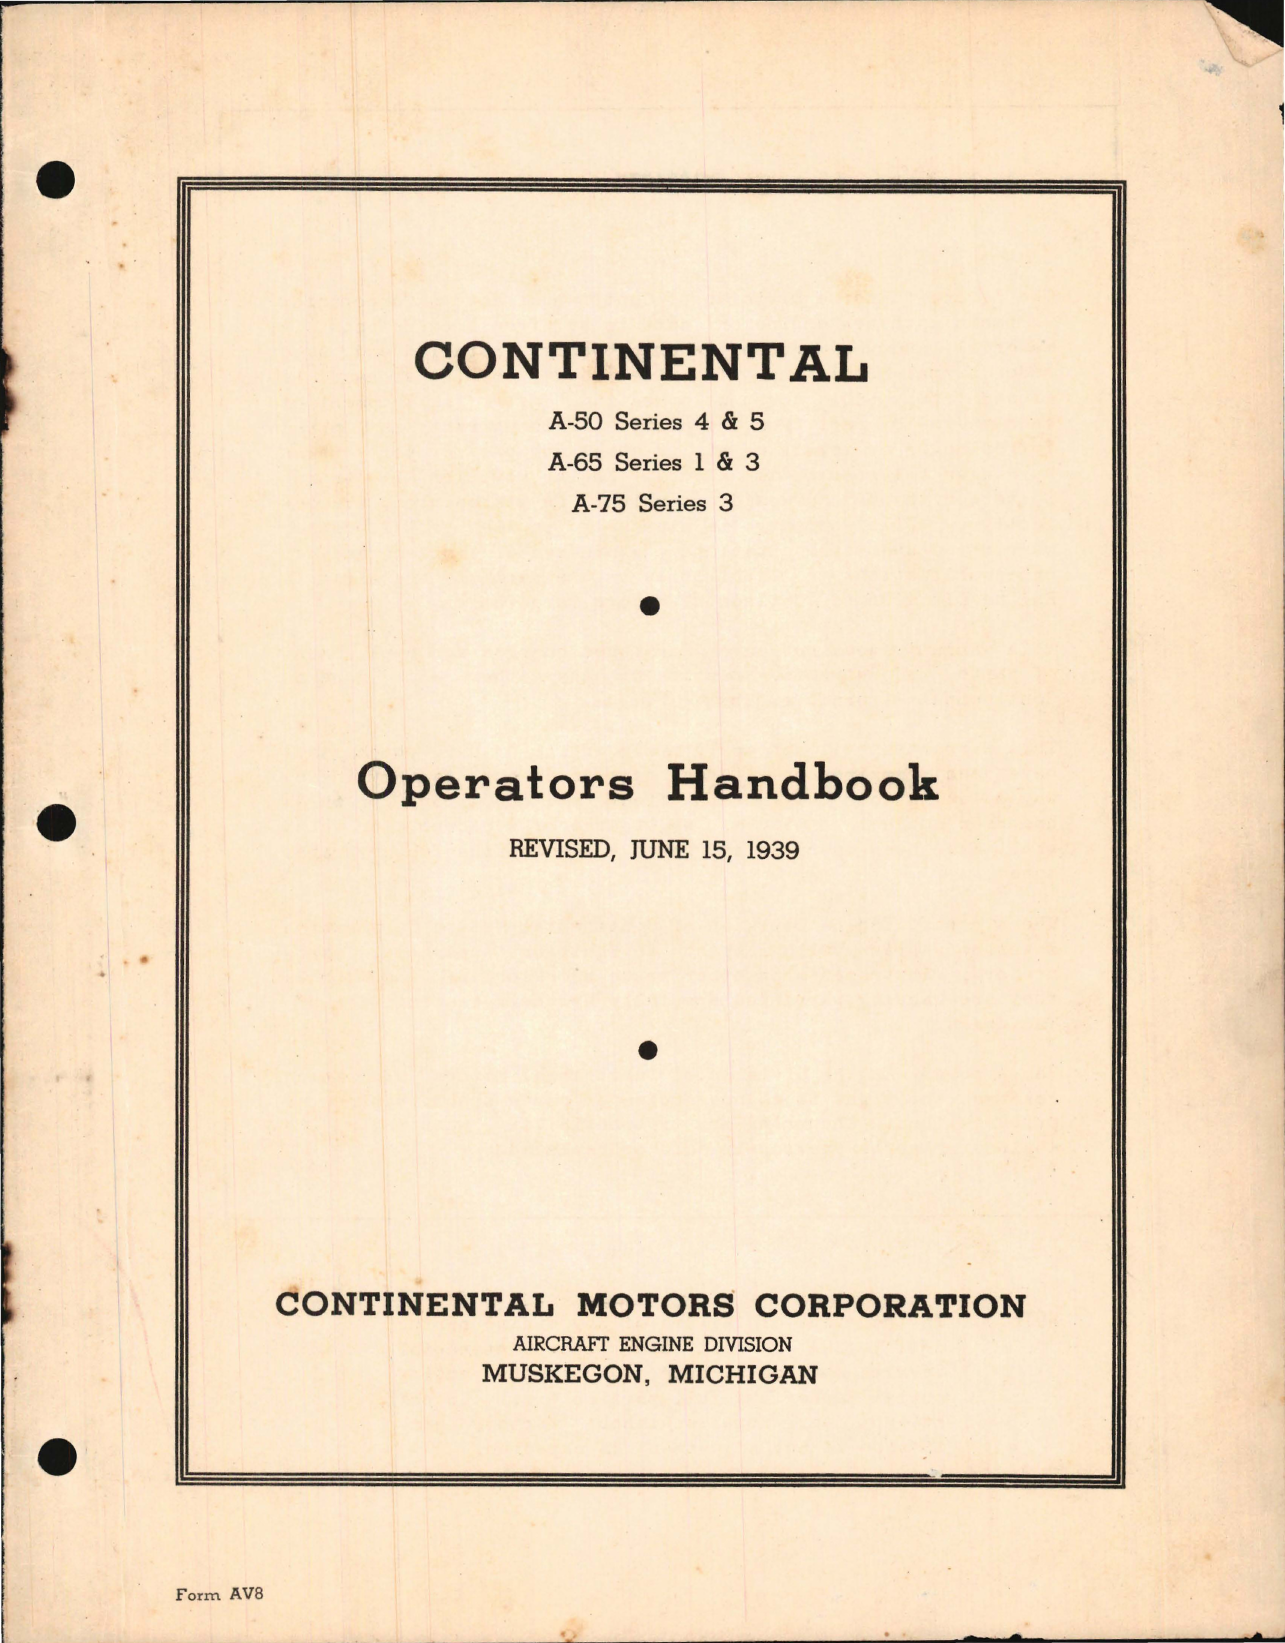 Sample page 1 from AirCorps Library document: Operators Handbook for Continental A-50, A-65, and A-75 Series Engines